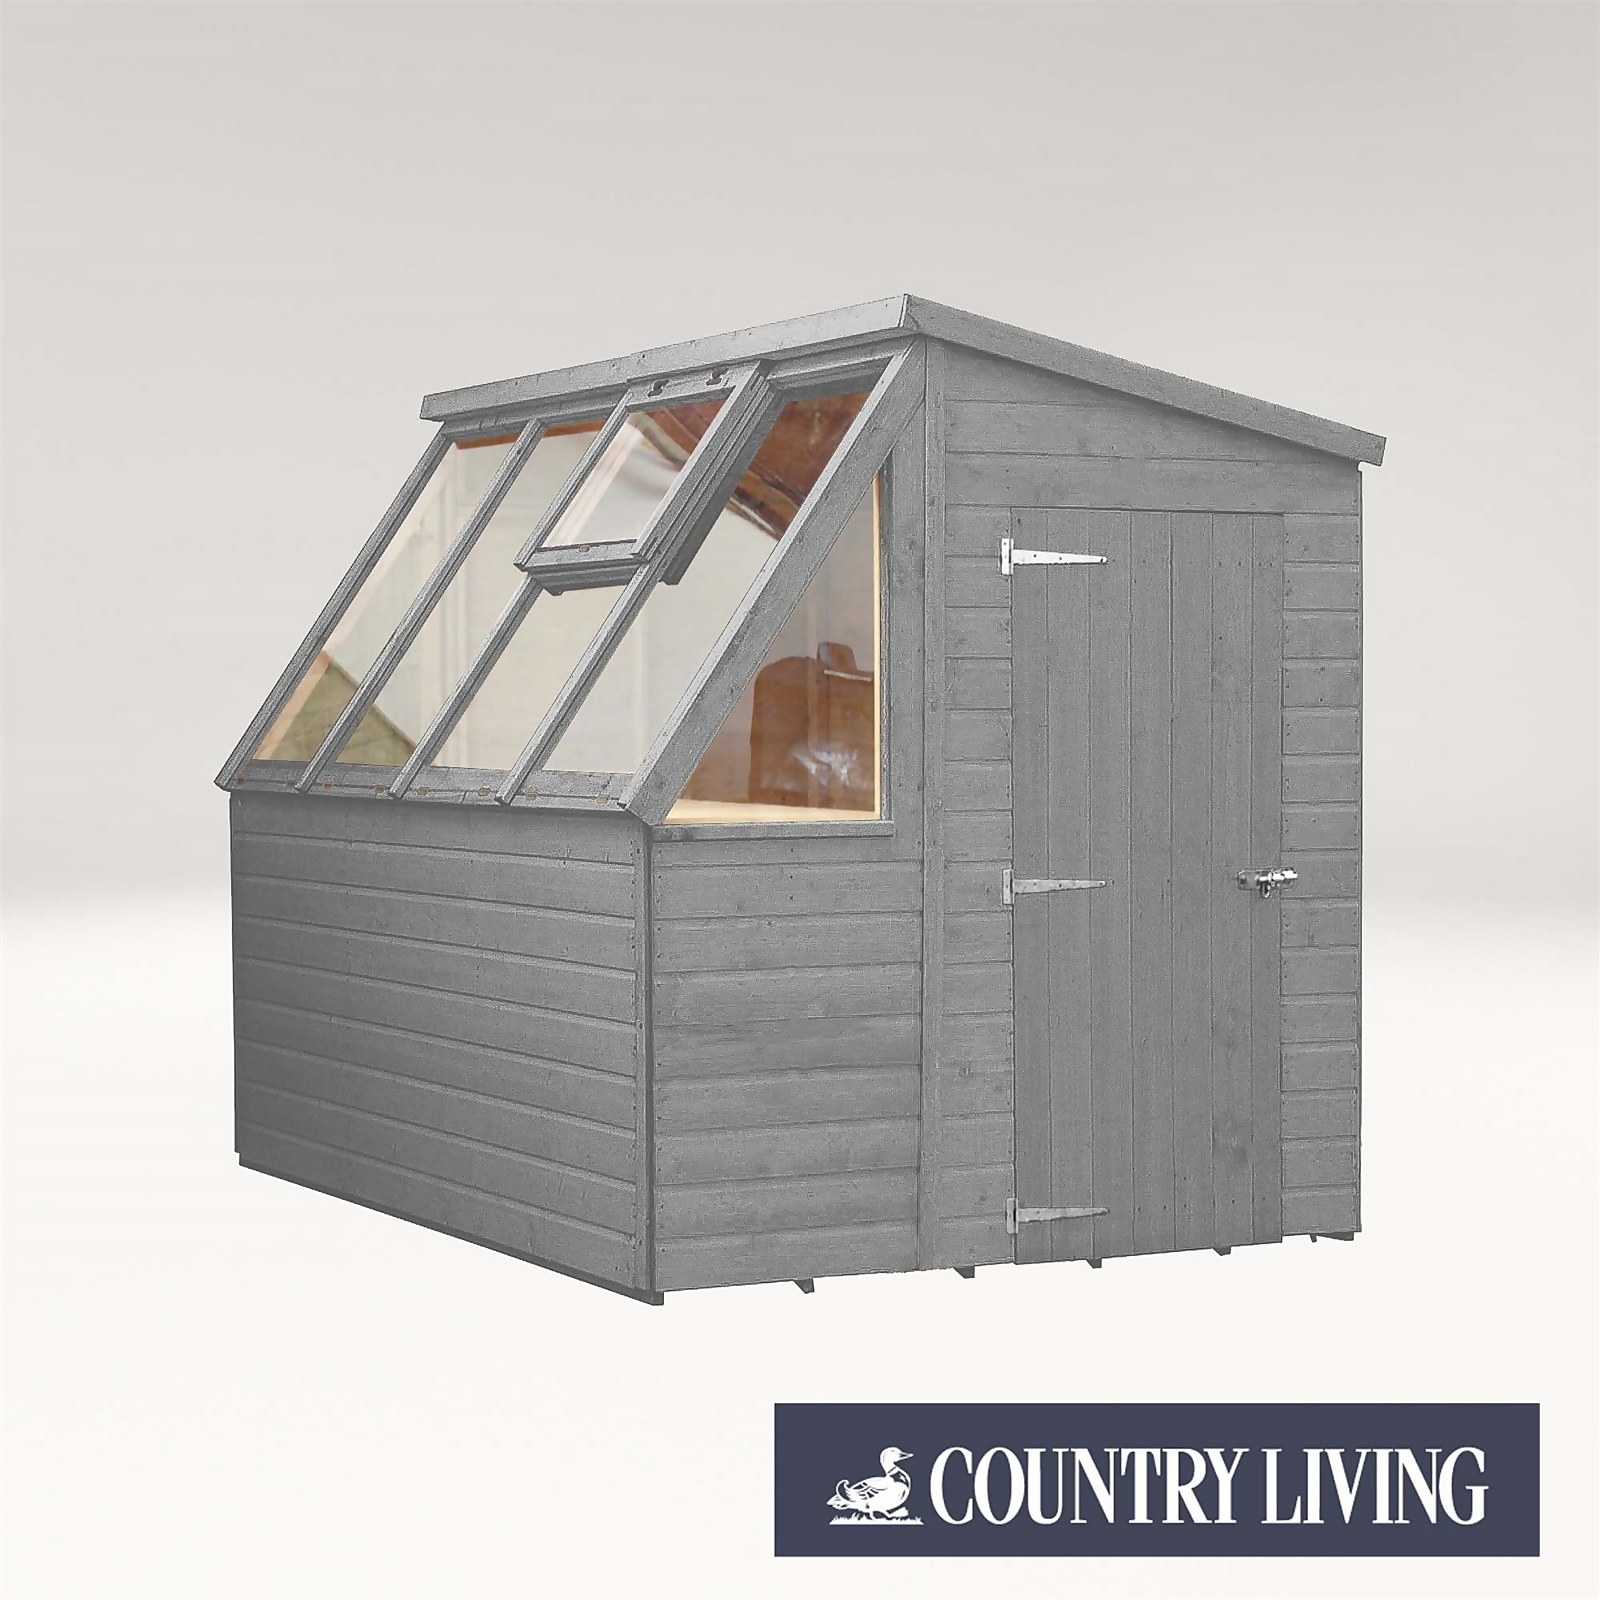 Country Living Caythorpe 8 x 6ft Premium Potting Shed Painted + Installation - Thorpe Towers Grey